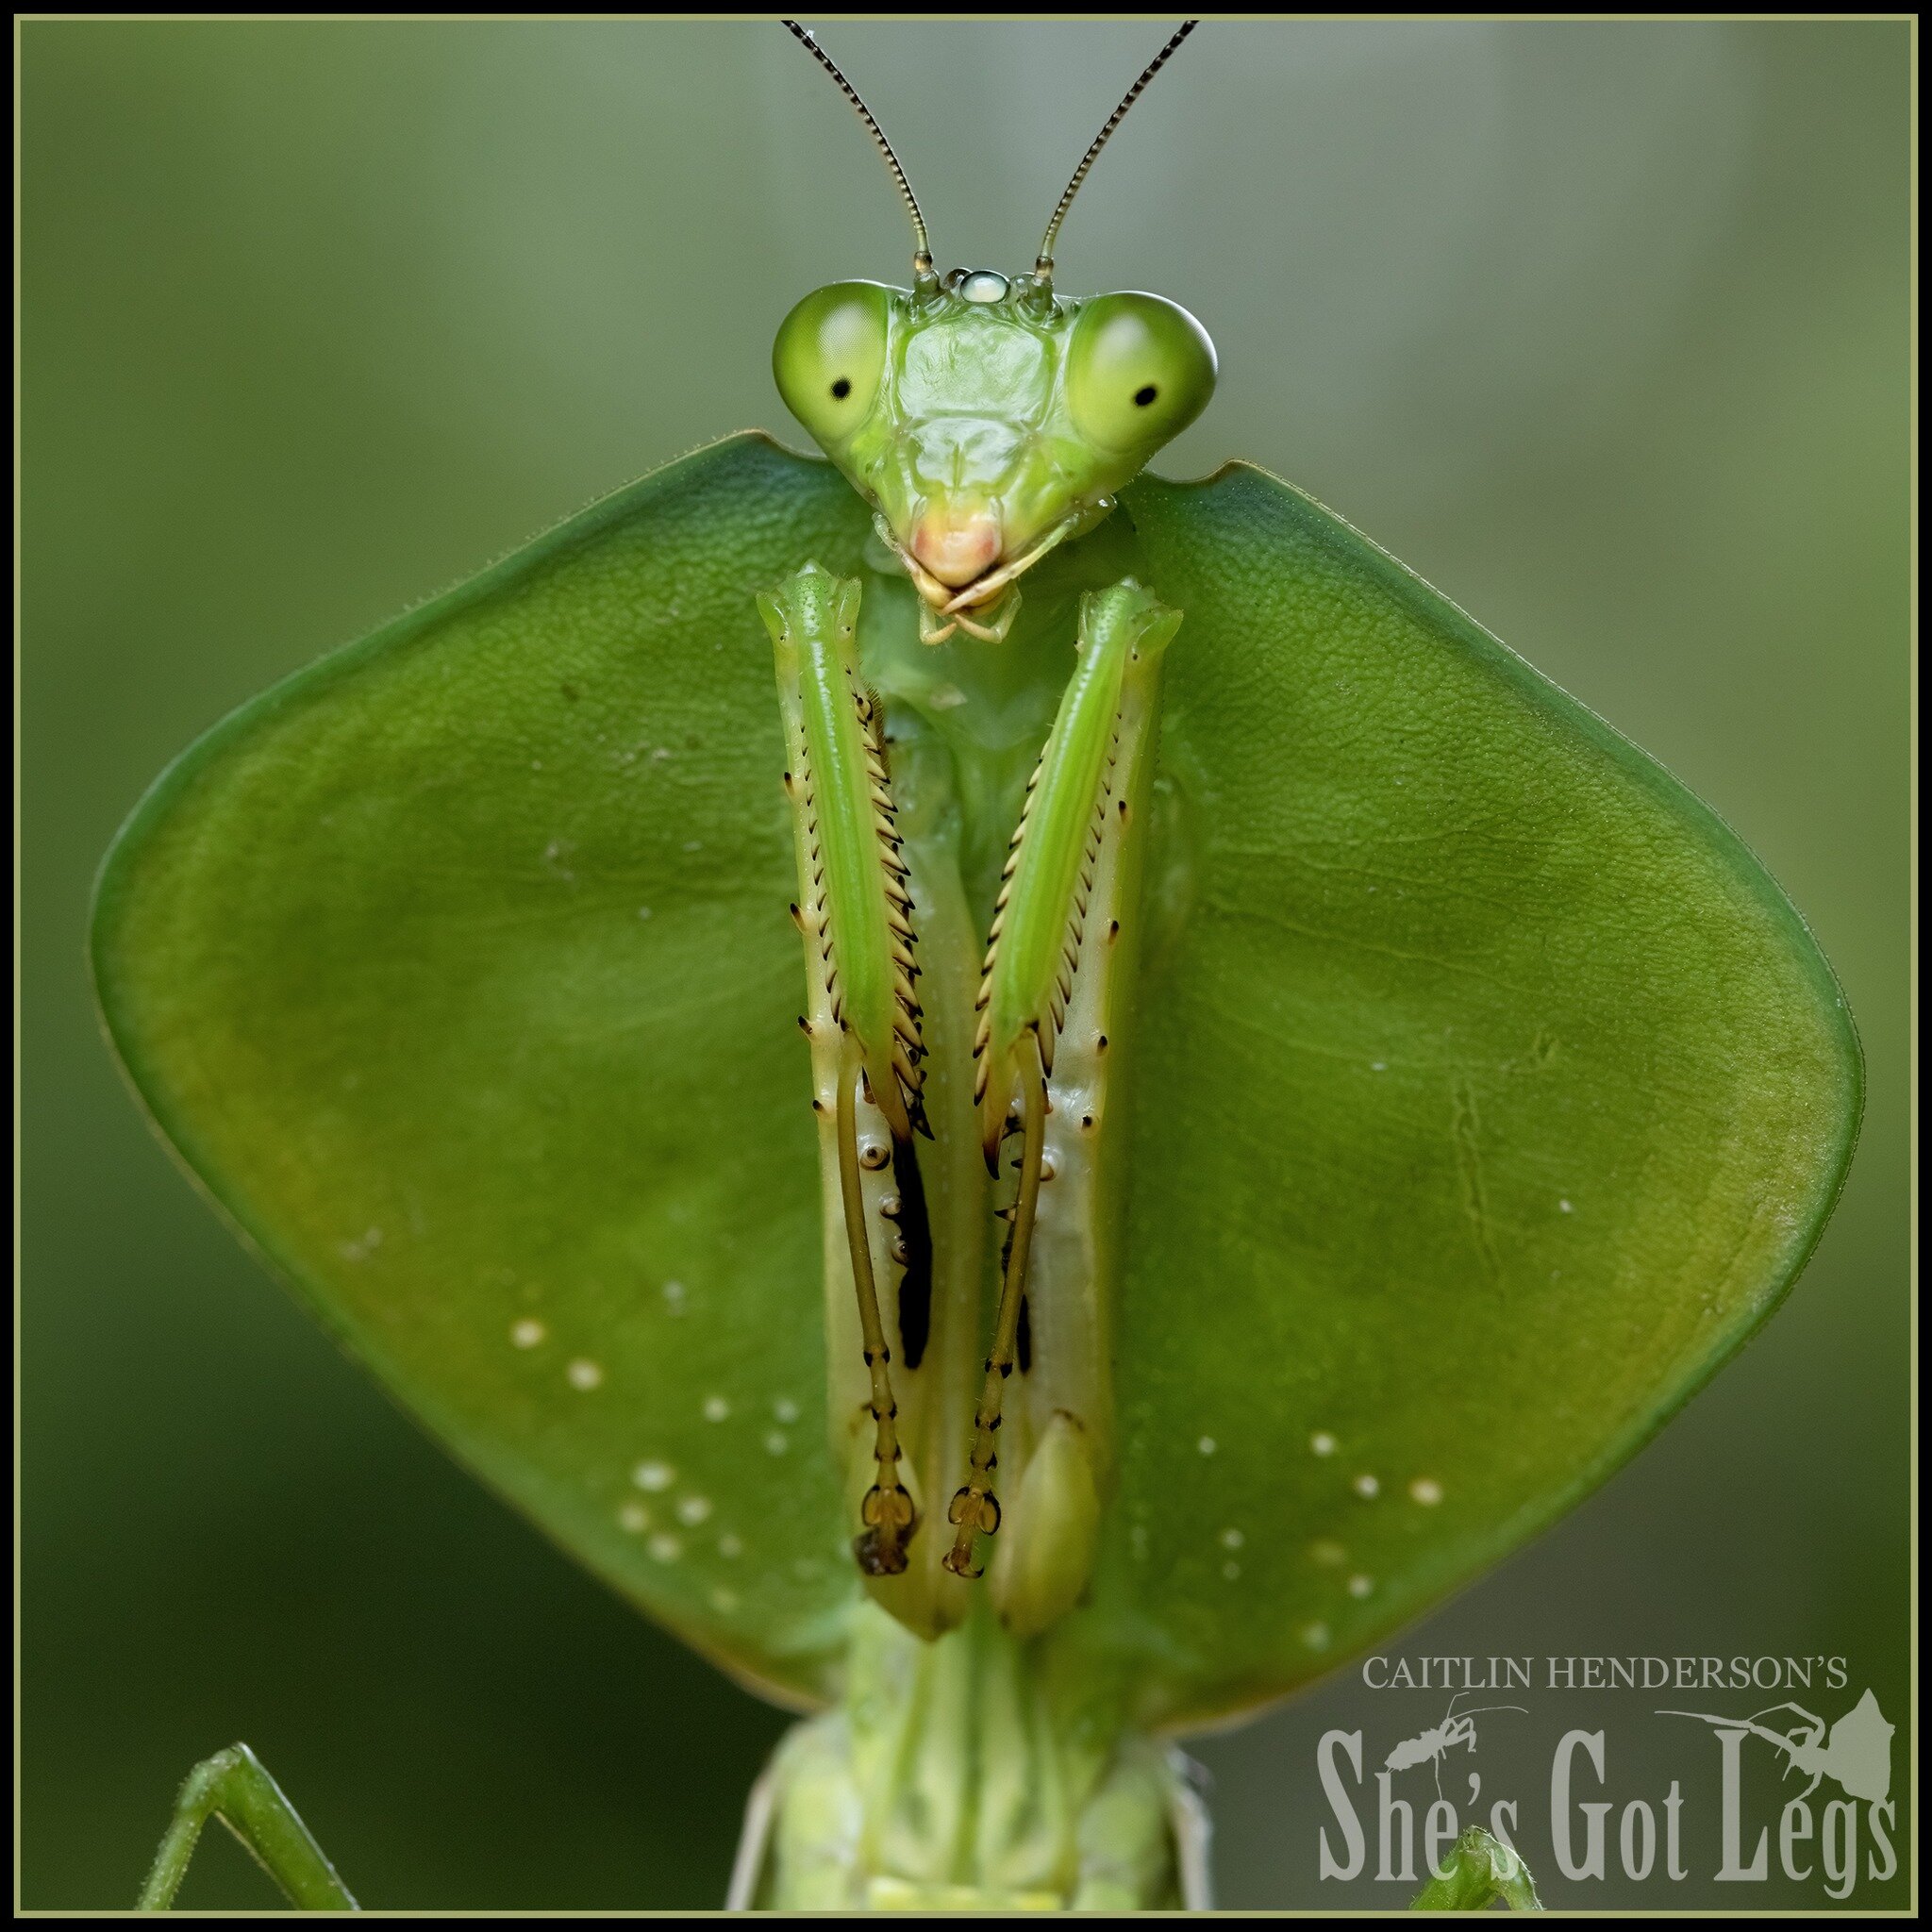 Don&rsquo;t tell him I said this but what a cutie 🥺

This is the very ferocious super predator, the Peruvian Shield Mantis. He belongs to a group of mantises with a bizarre looking thorax which look like someone gave them a good going-over with a ro